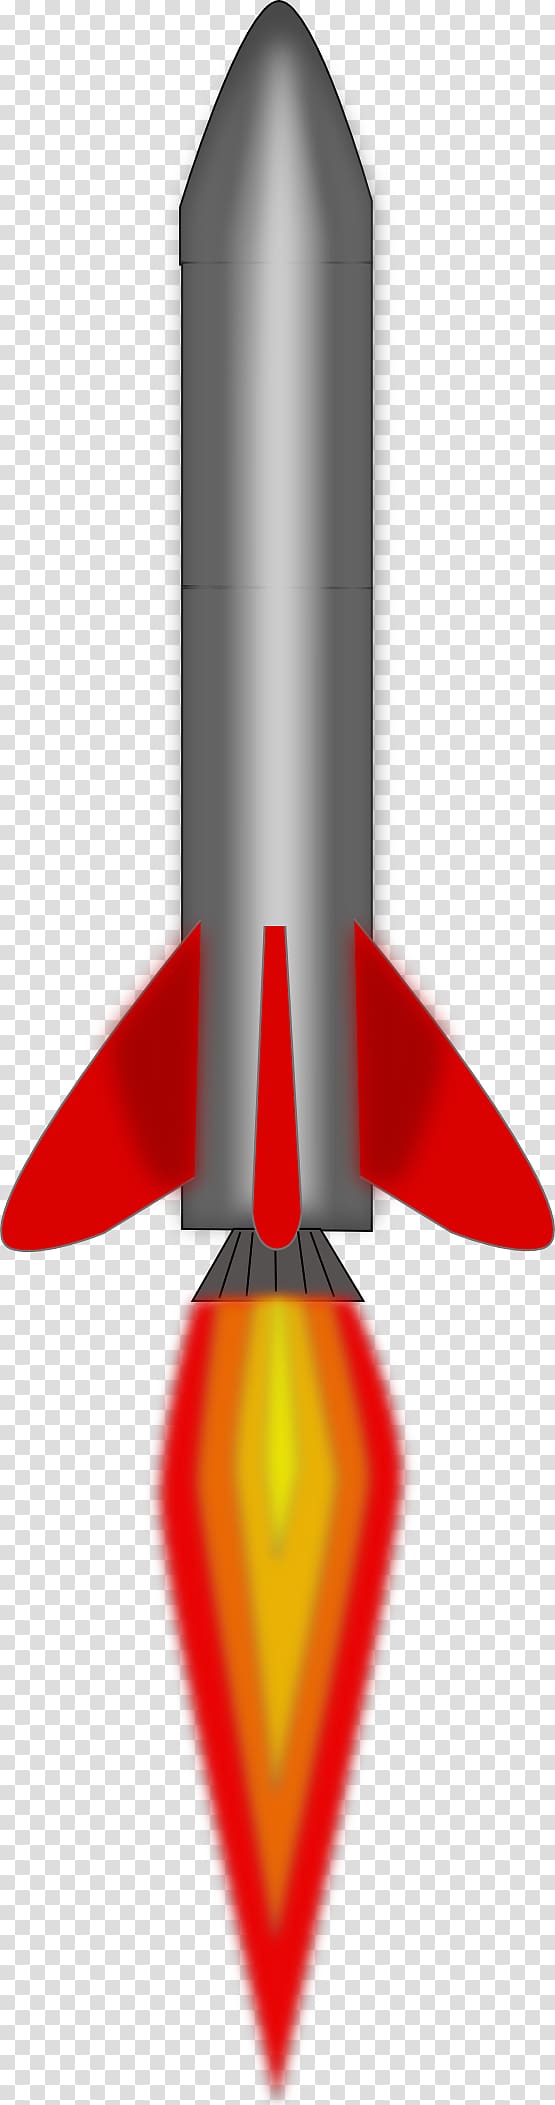 Rocket launcher Spacecraft , Nuclear Missile transparent background PNG clipart